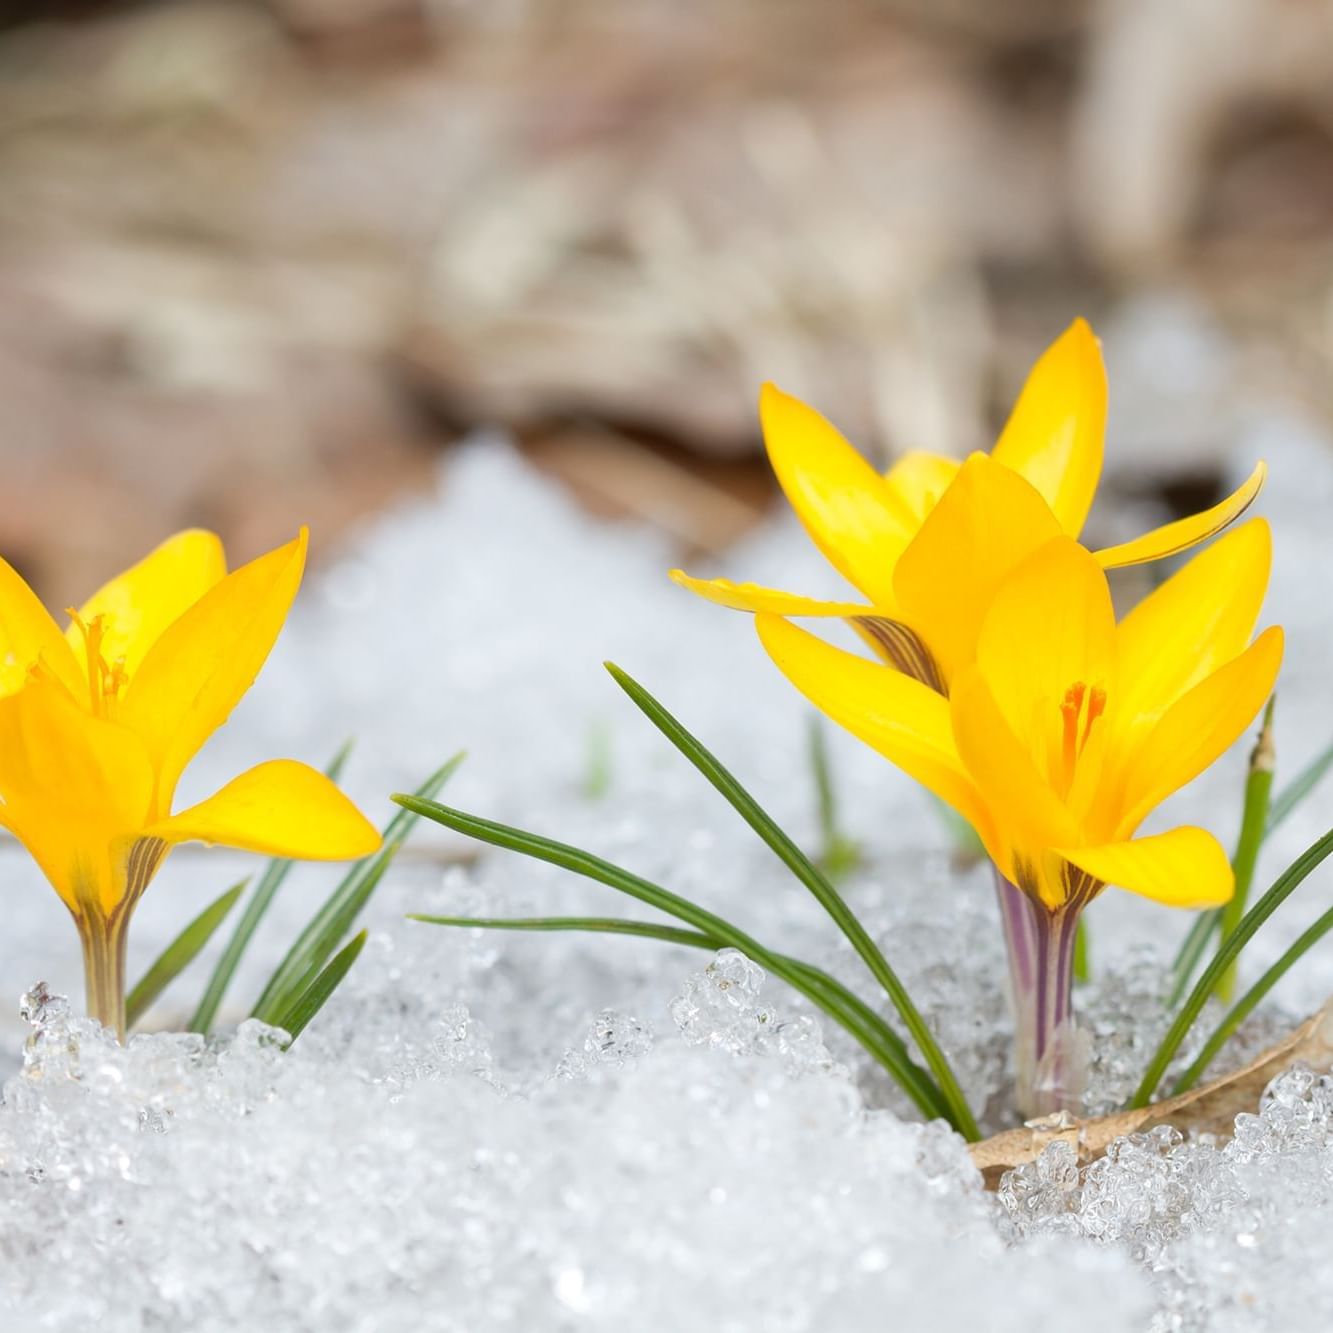 Yellow flowers blooming from snow